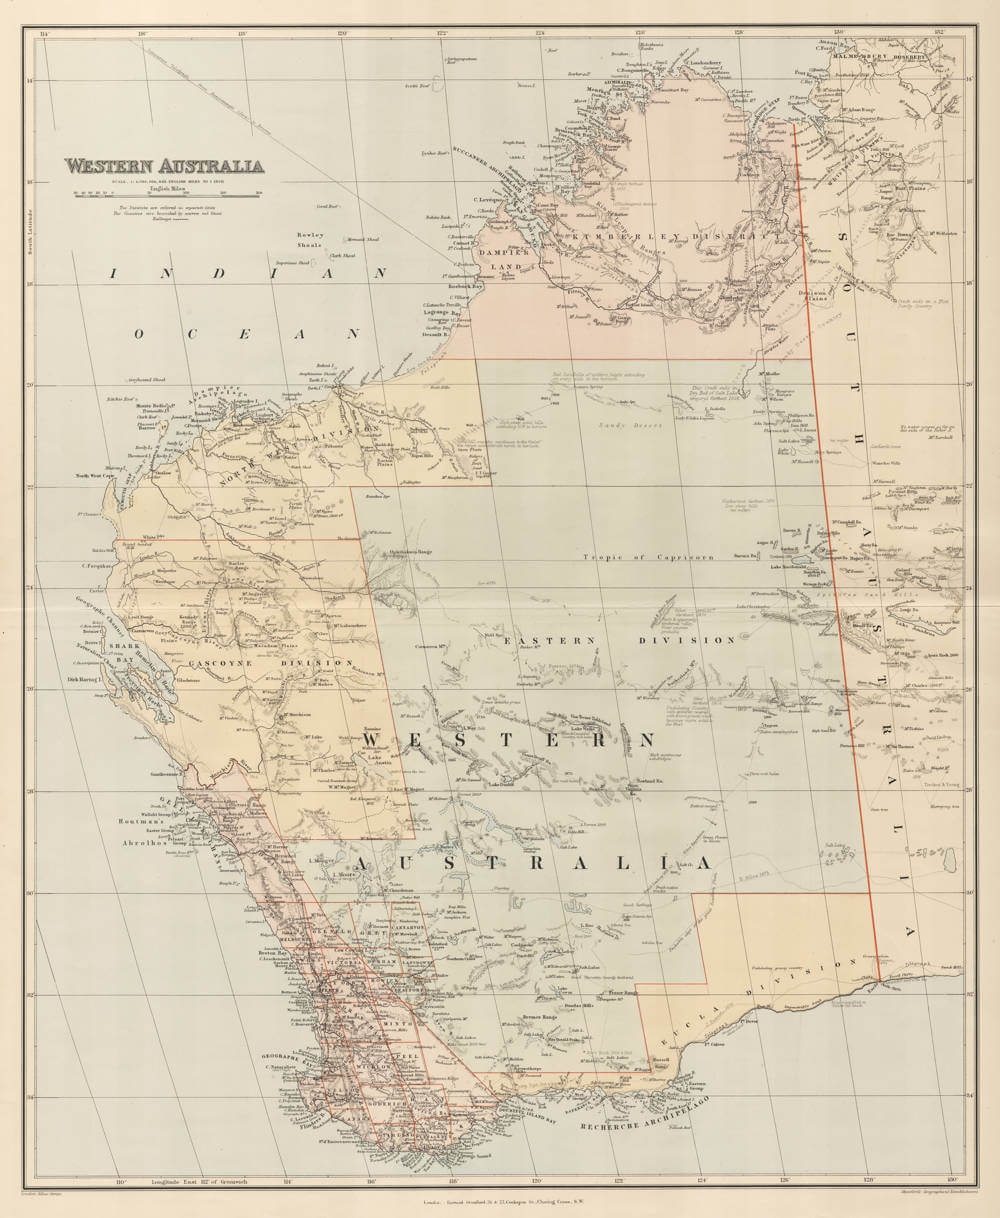 Antique map of Western Australia by Edward Stanford